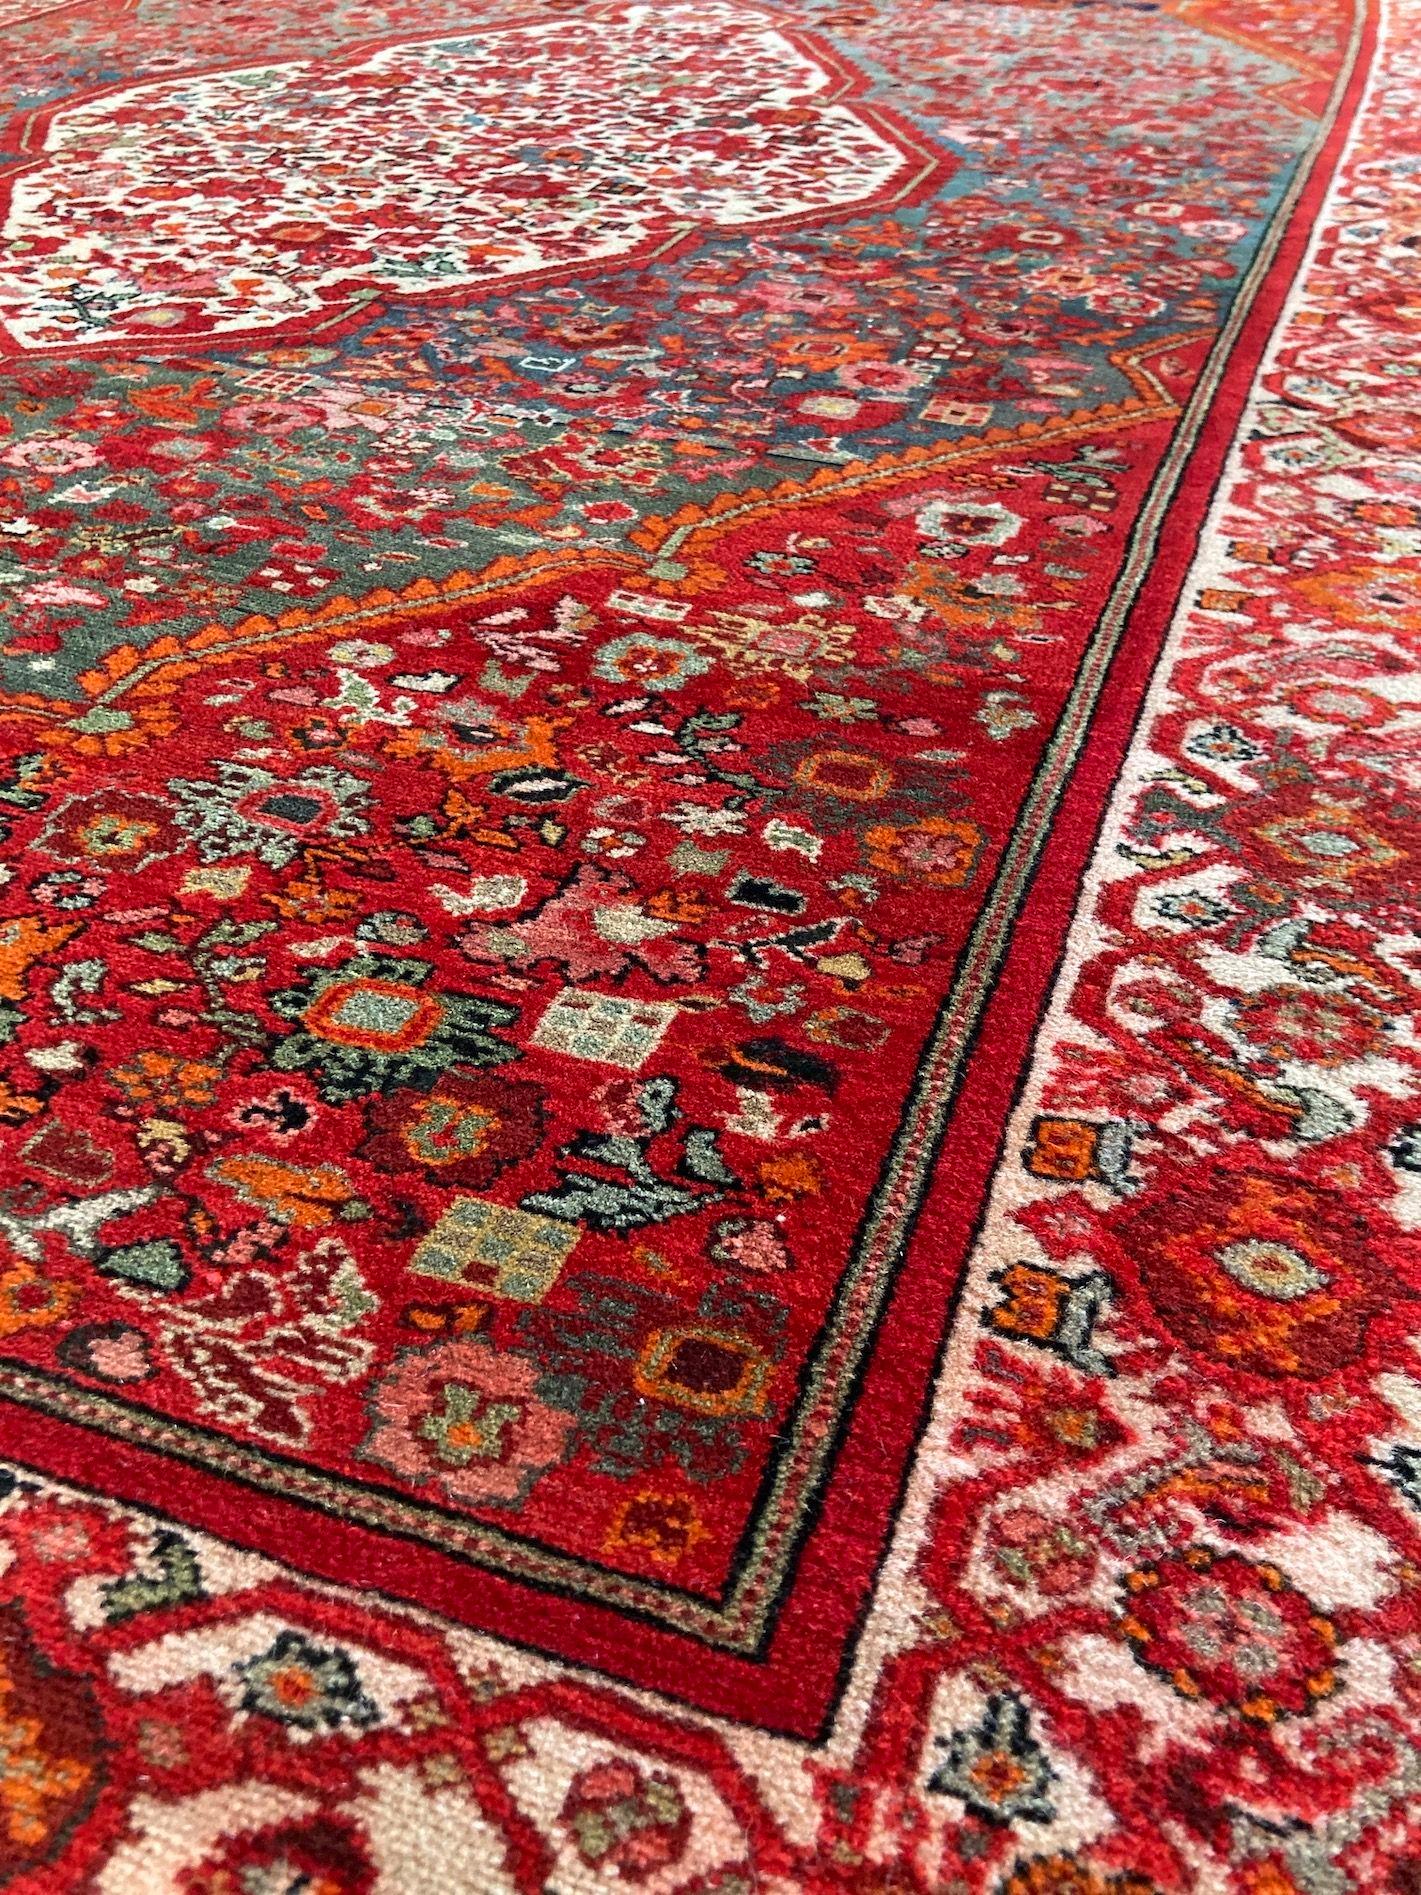 Antique Mishan Malayer Rug 1.98m x 1.32m For Sale 3